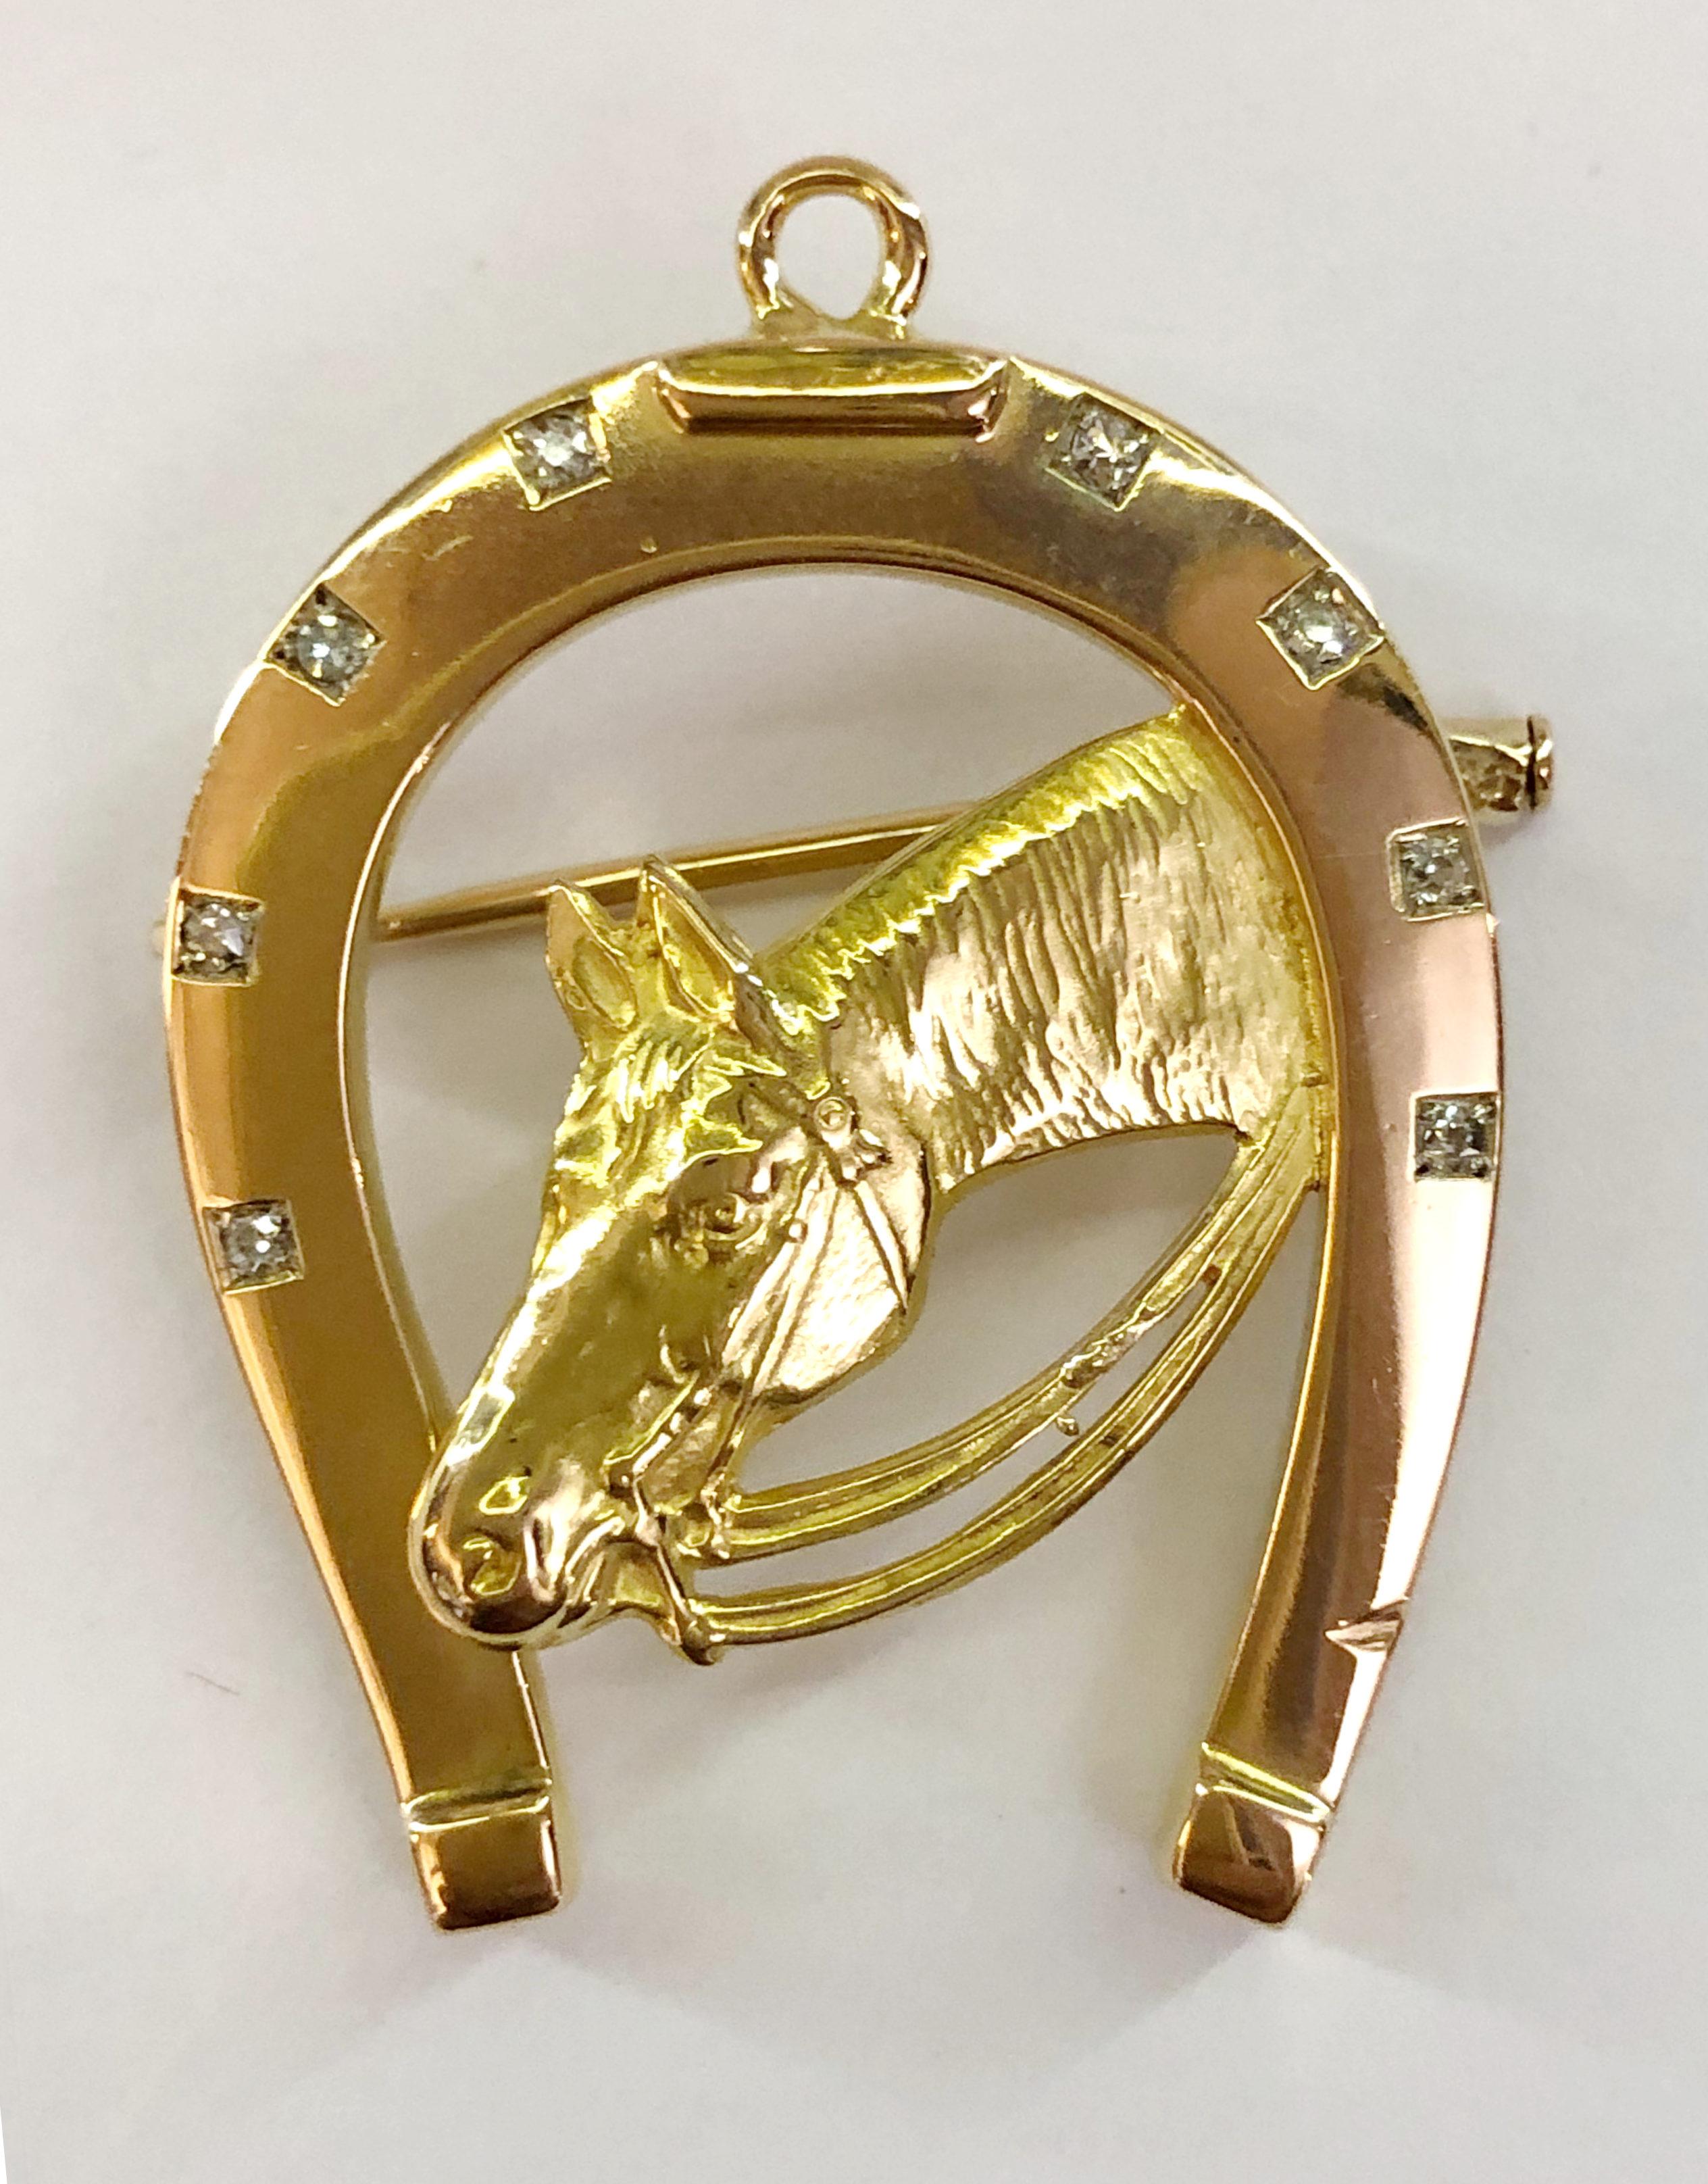 Vintage horseshoe brooch with 18 karat yellow gold and brilliant diamonds, Italy 1940-1950s